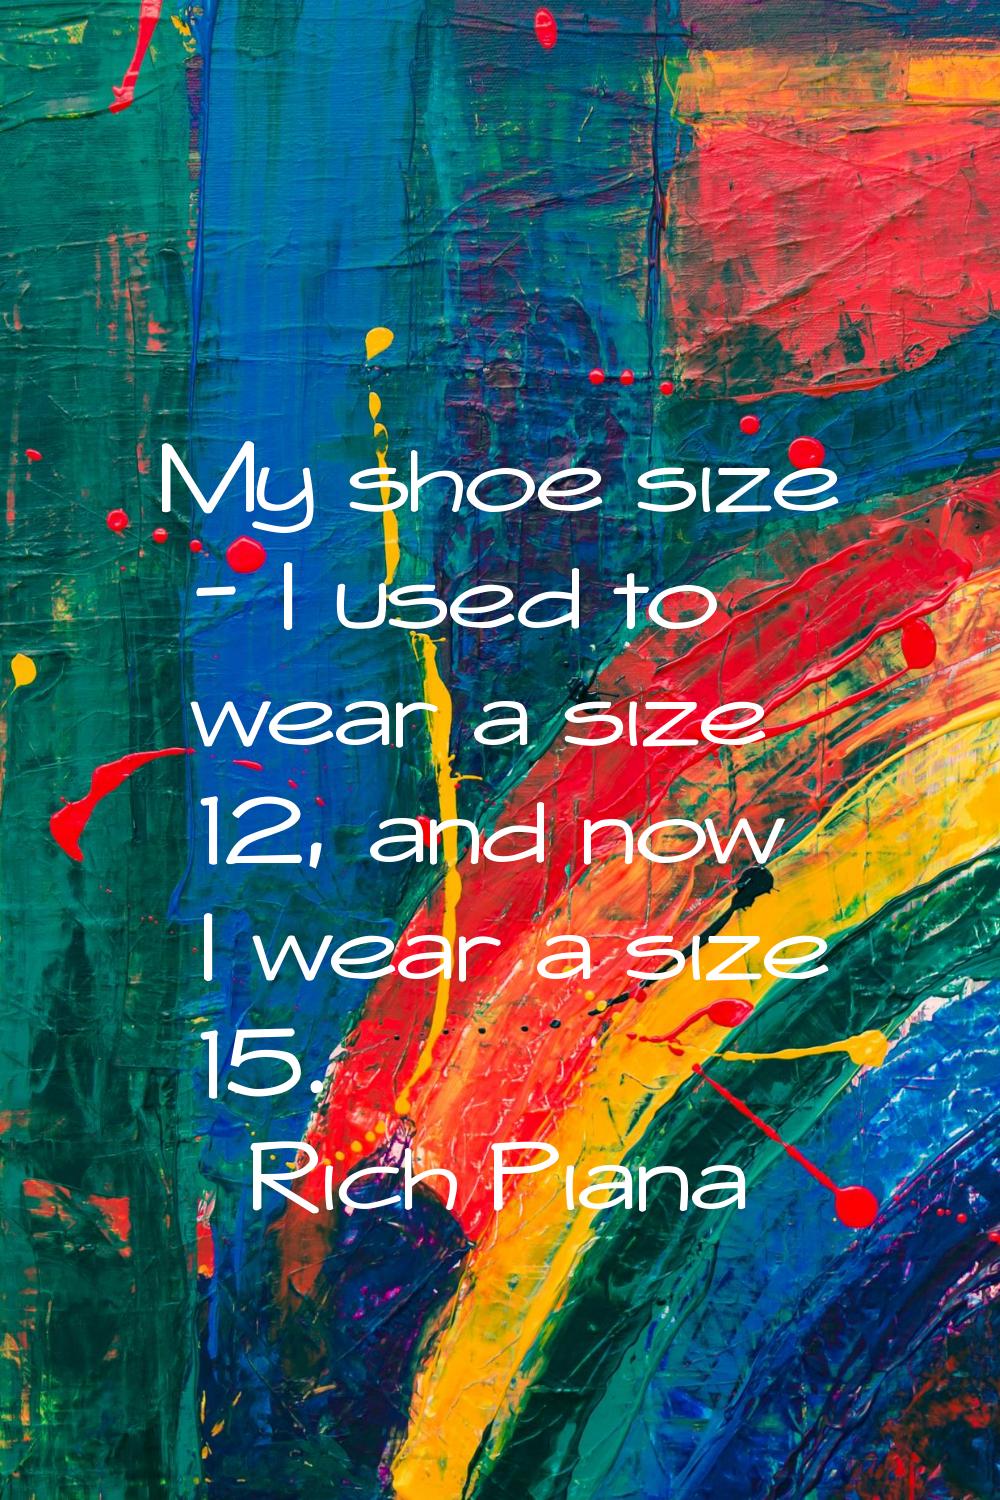 My shoe size - I used to wear a size 12, and now I wear a size 15.